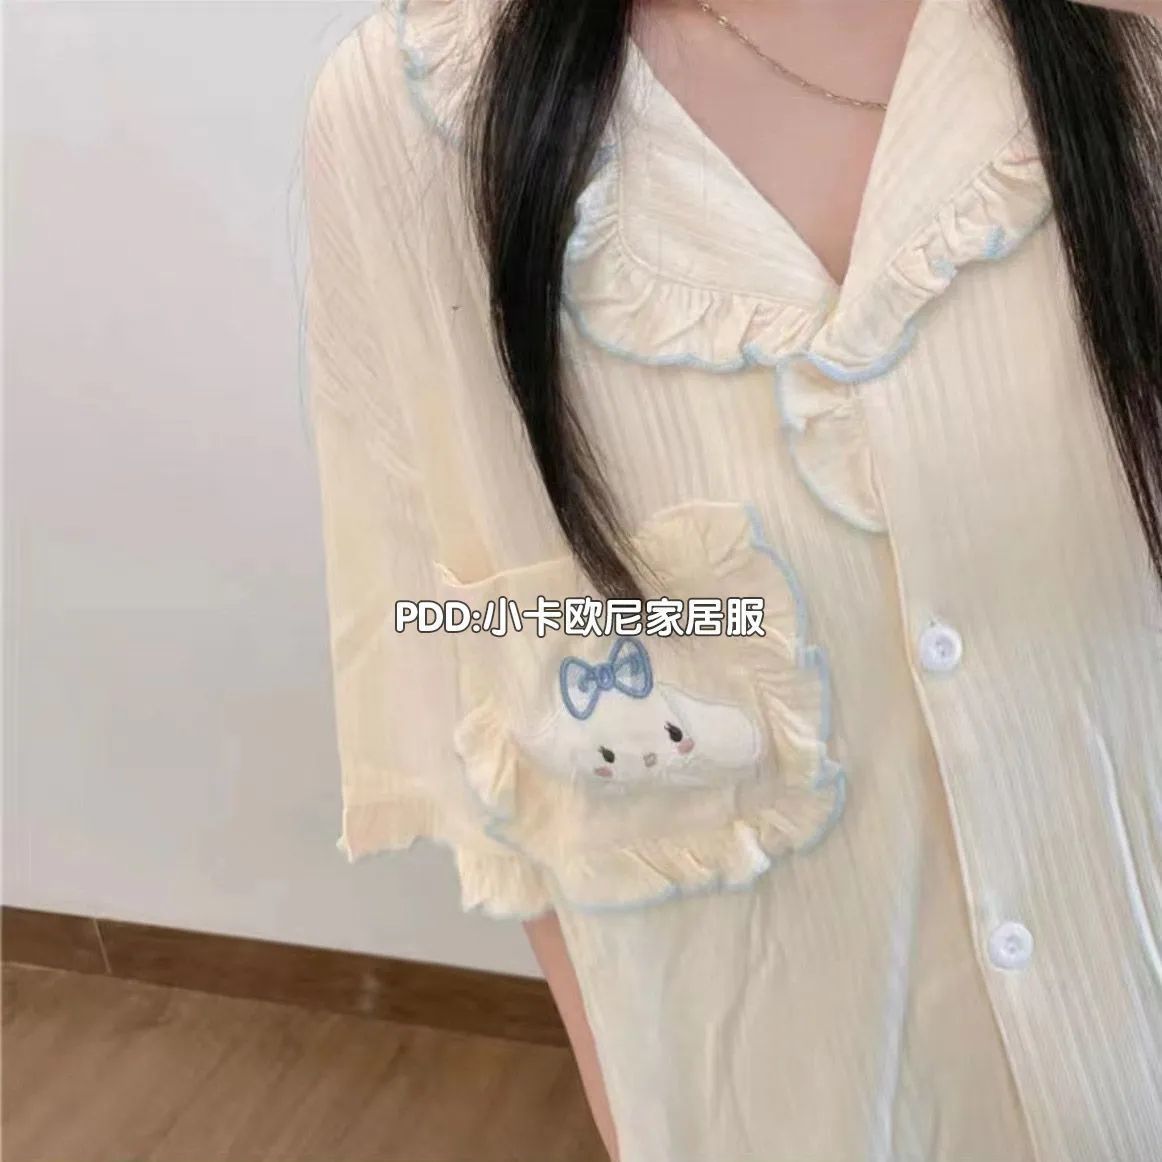 Pajamas women's summer Korean pajamas high-value short-sleeved thin section ins style cinnamon dog girl home clothes can be worn outside